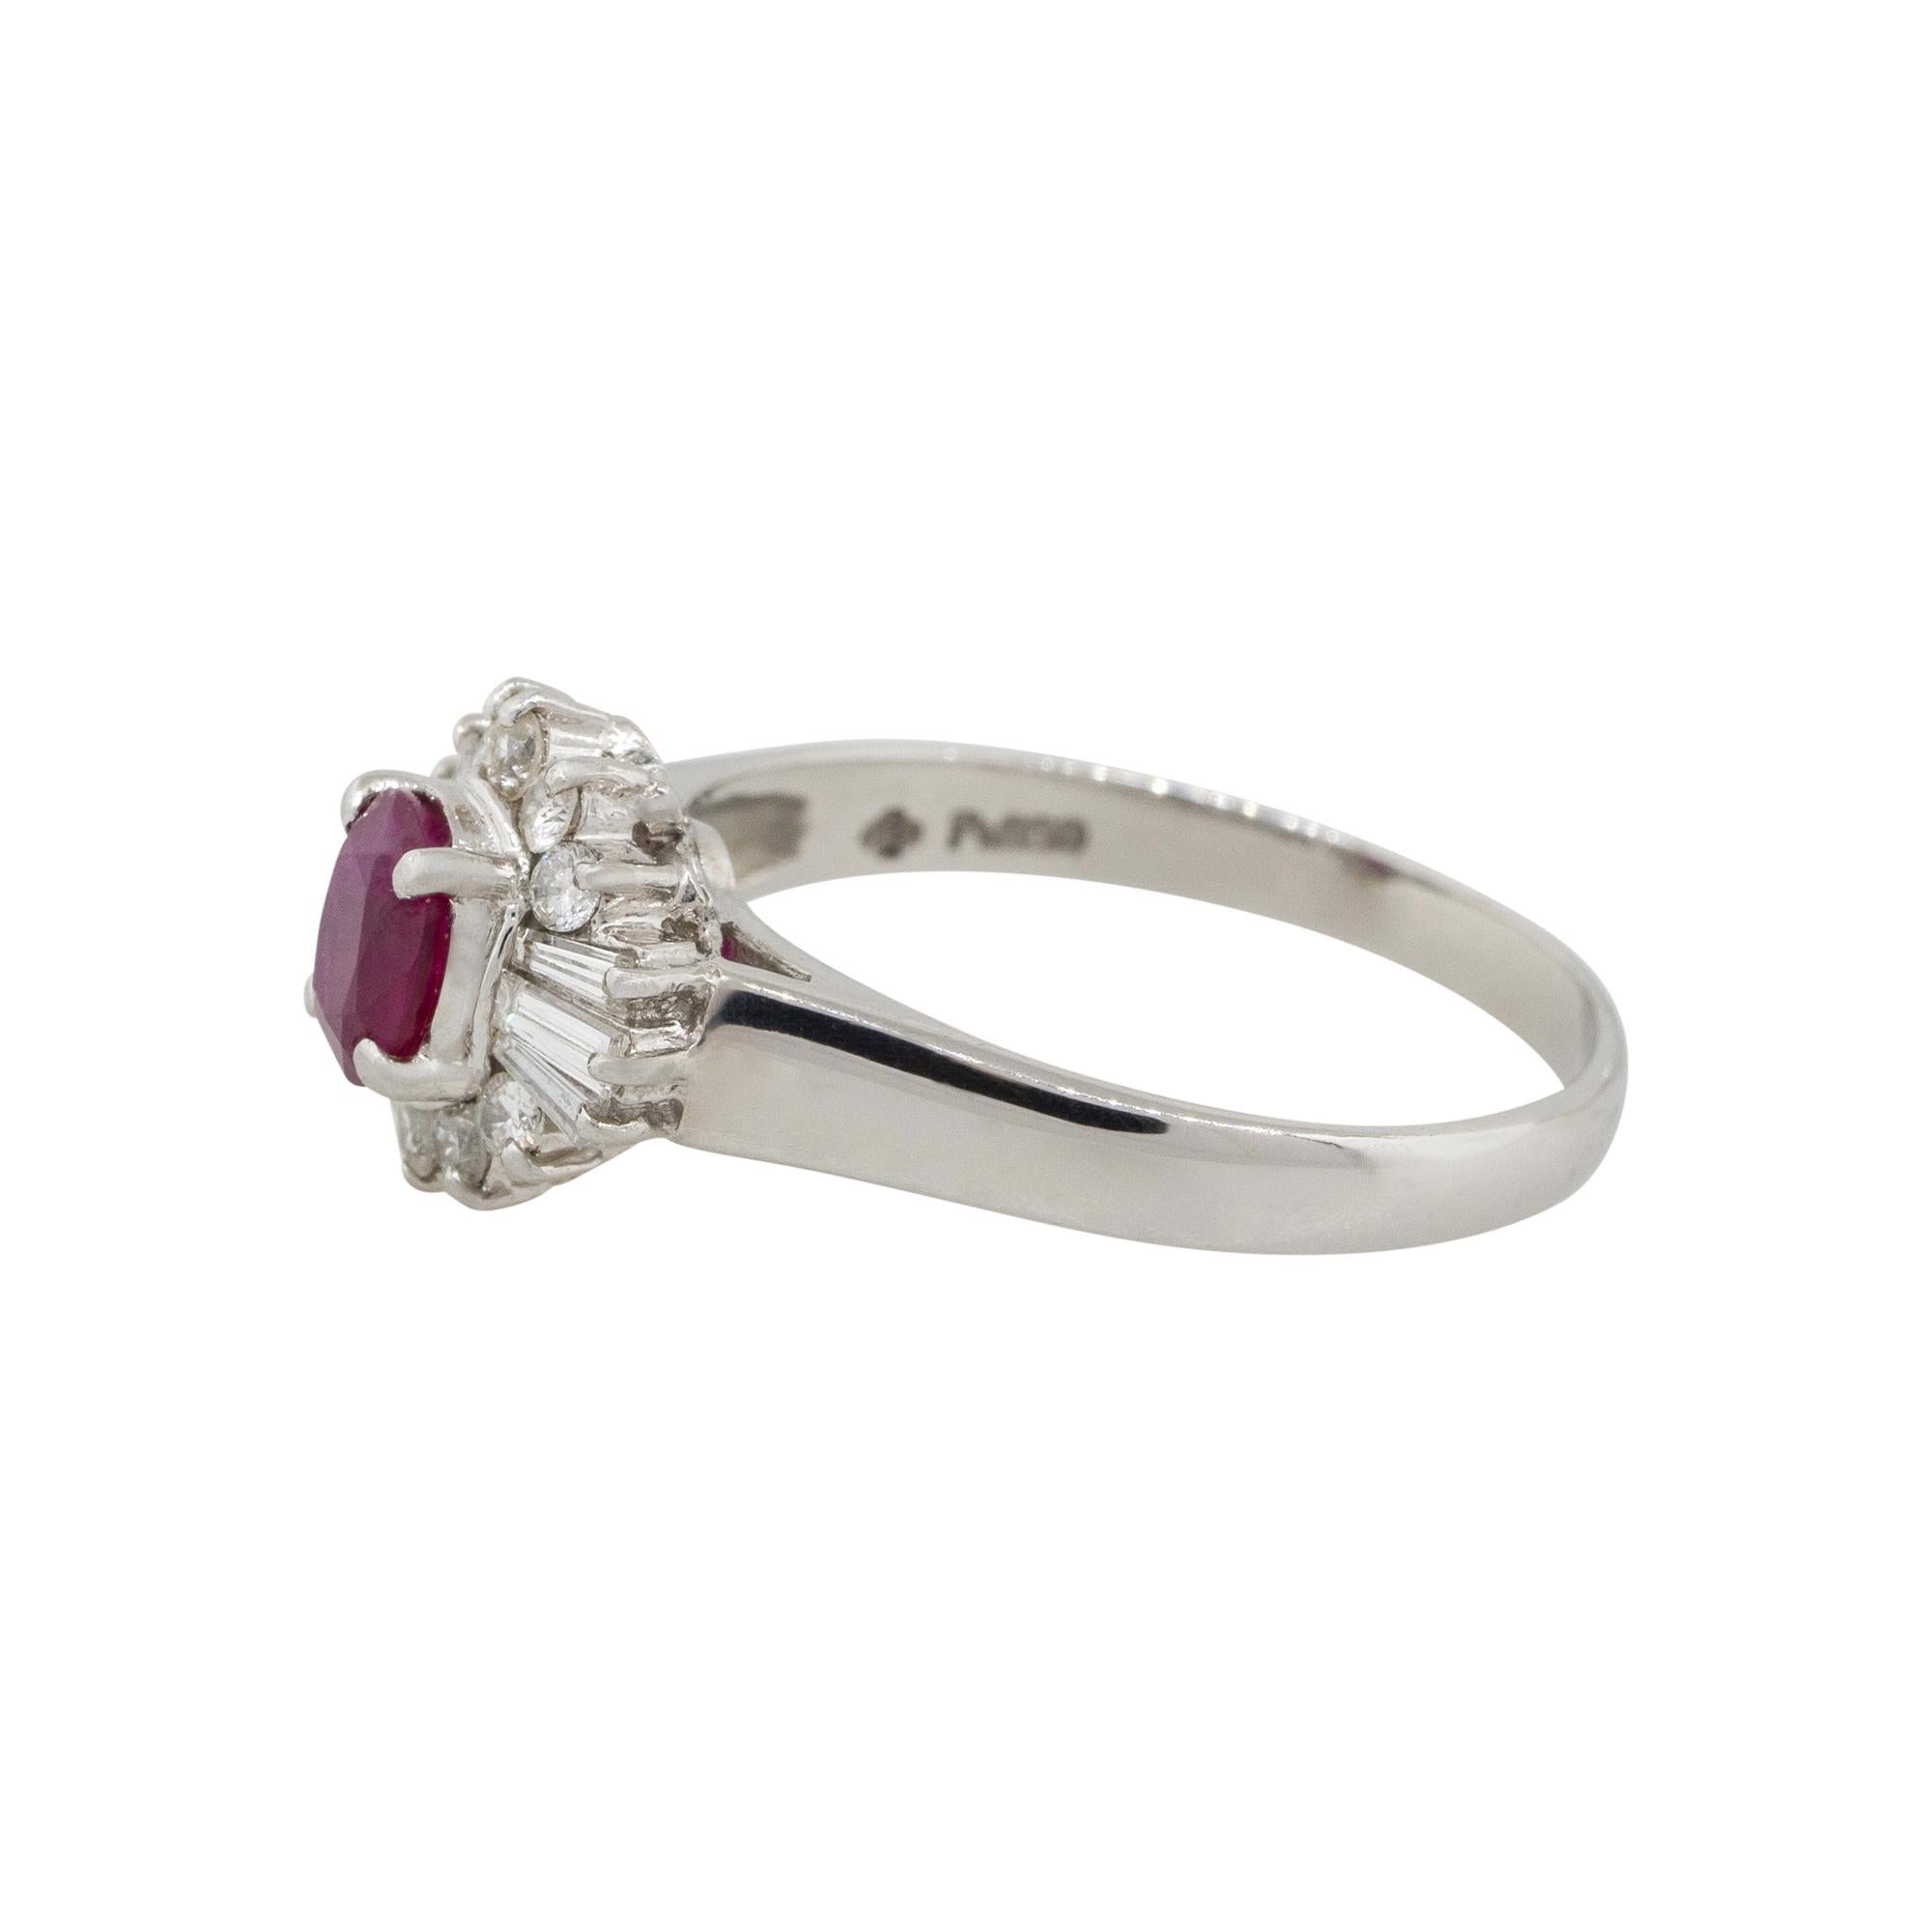 Material: Platinum
Gemstone details: Approx. 0.70 oval cut Ruby gemstone
Diamond details: Approx. 0.43ctw of round and baguette cut diamonds. Diamonds are G/H in color and VS in clarity
Ring Size: 7.25 
Ring Measurements: 0.75